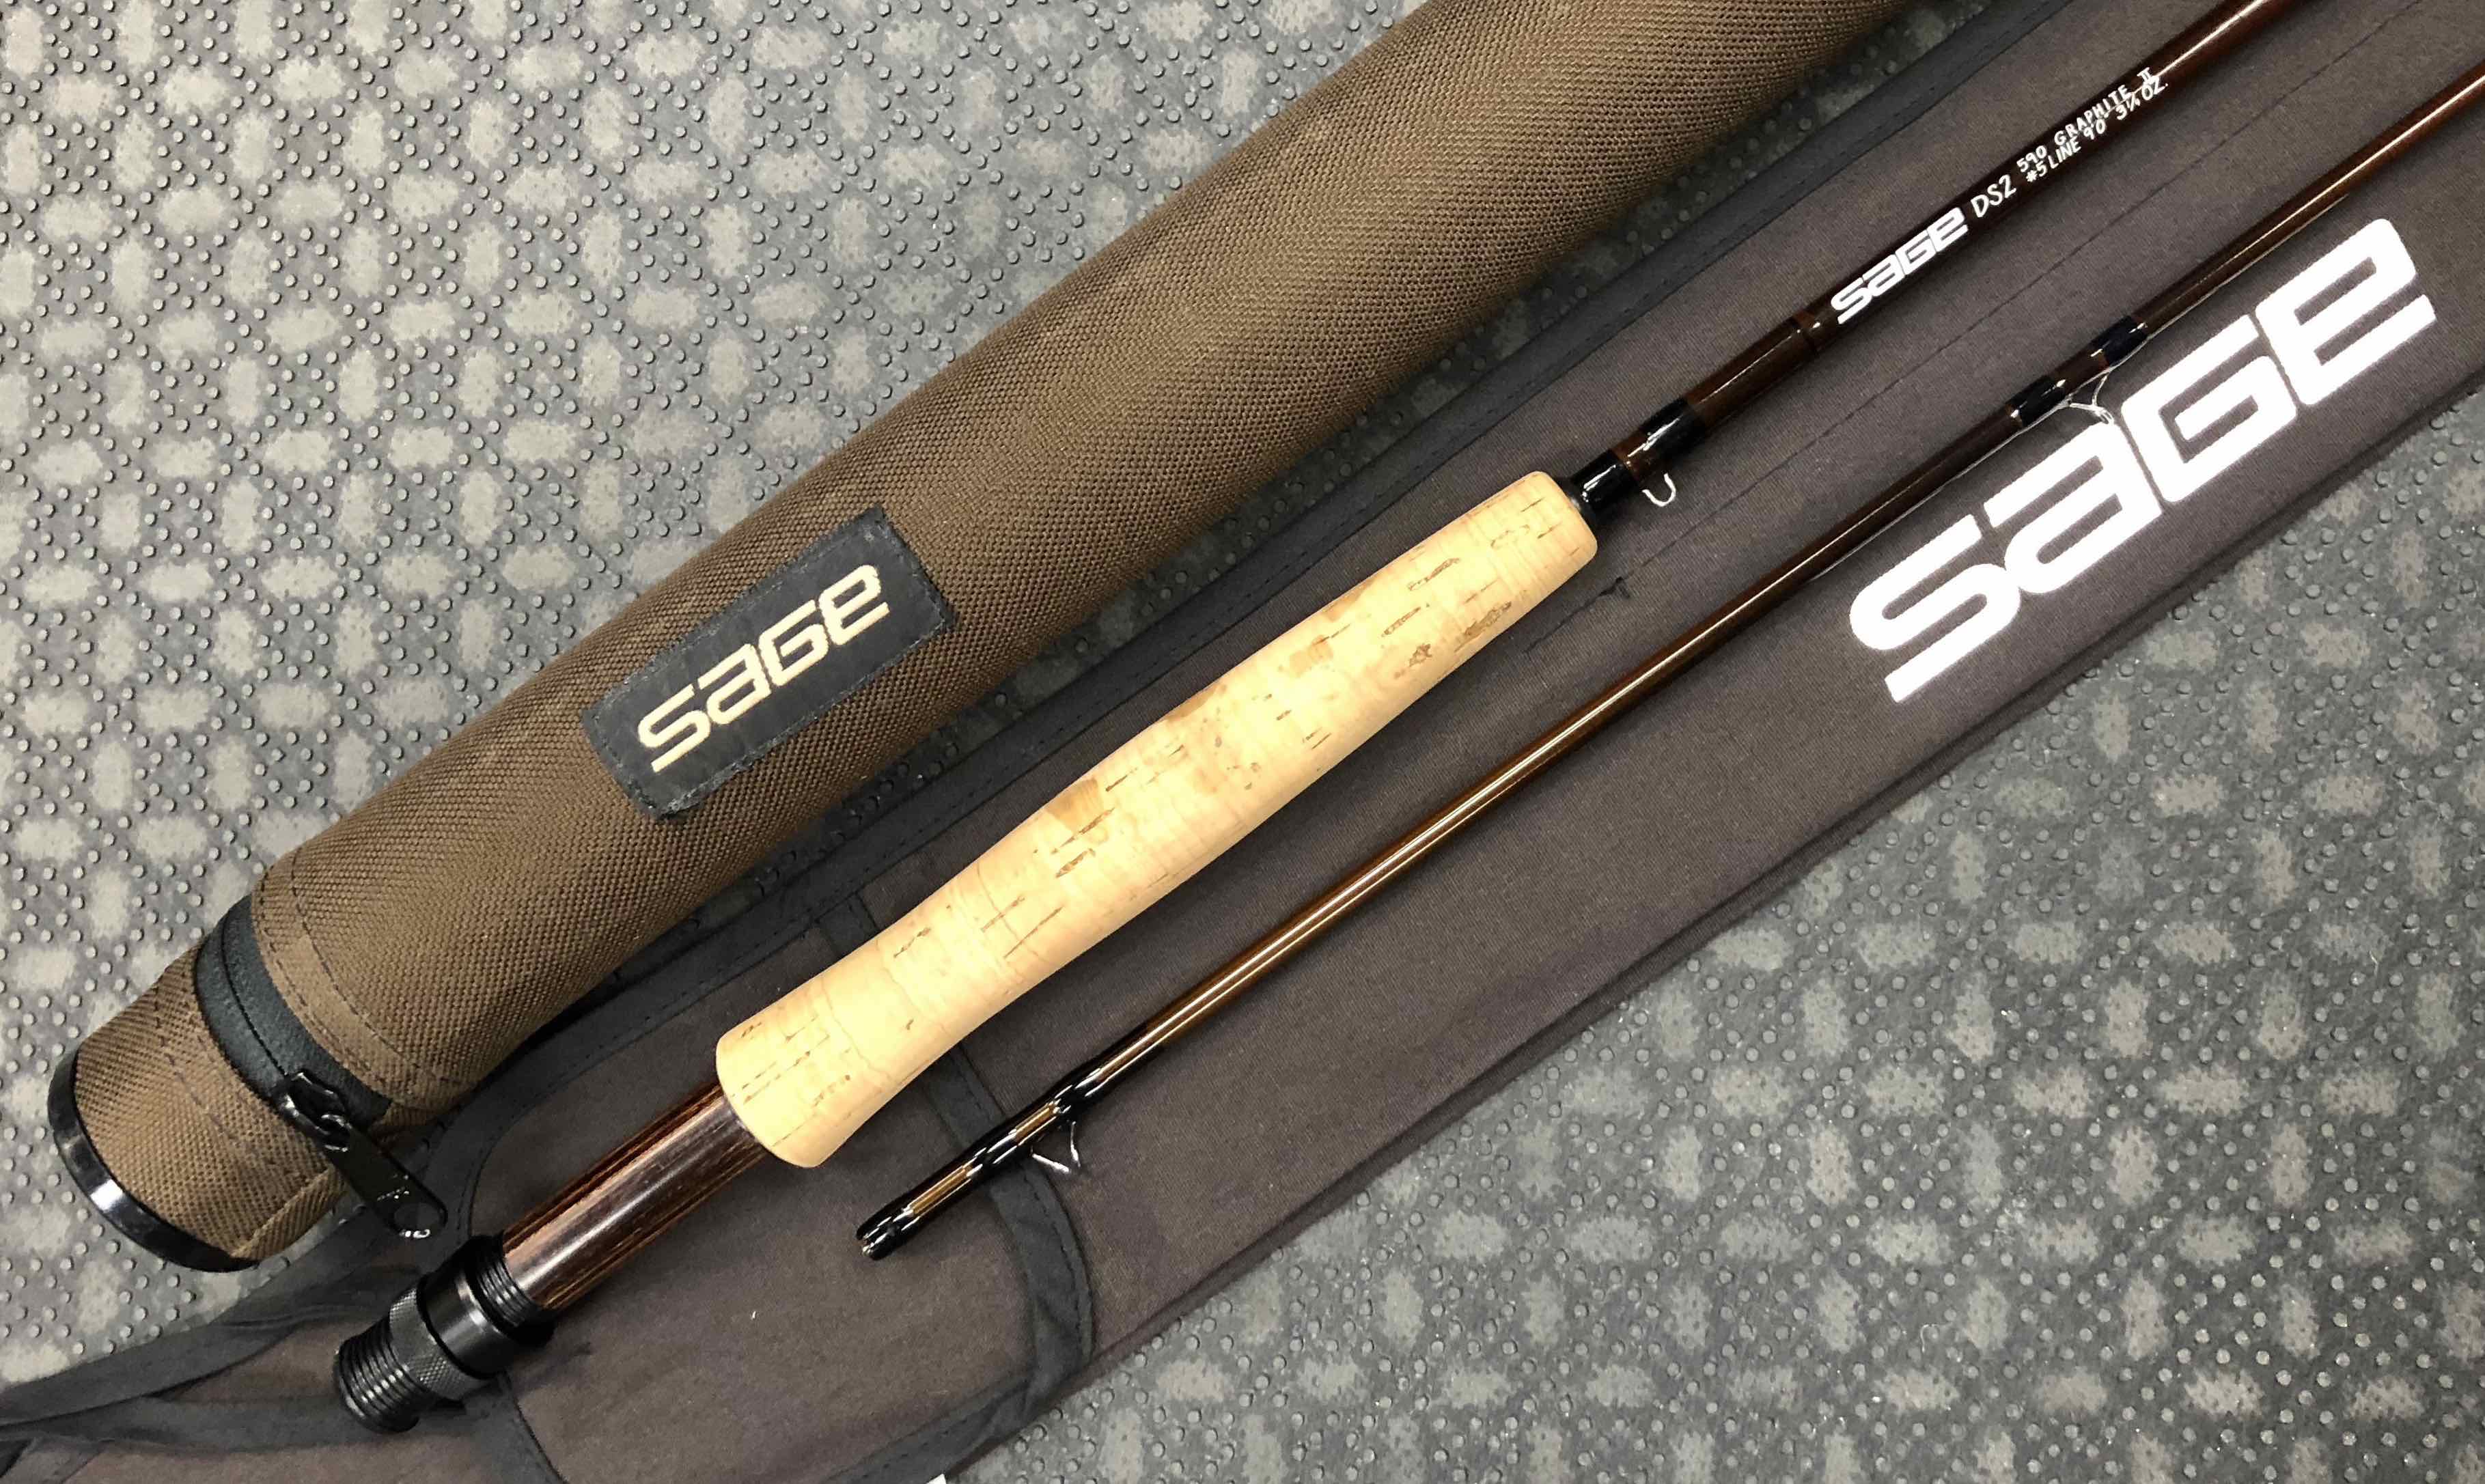 Sold Sage Ds2 590 9 5wt Graphite Ii 2pc Fly Rod Mint Condition 150 The First 